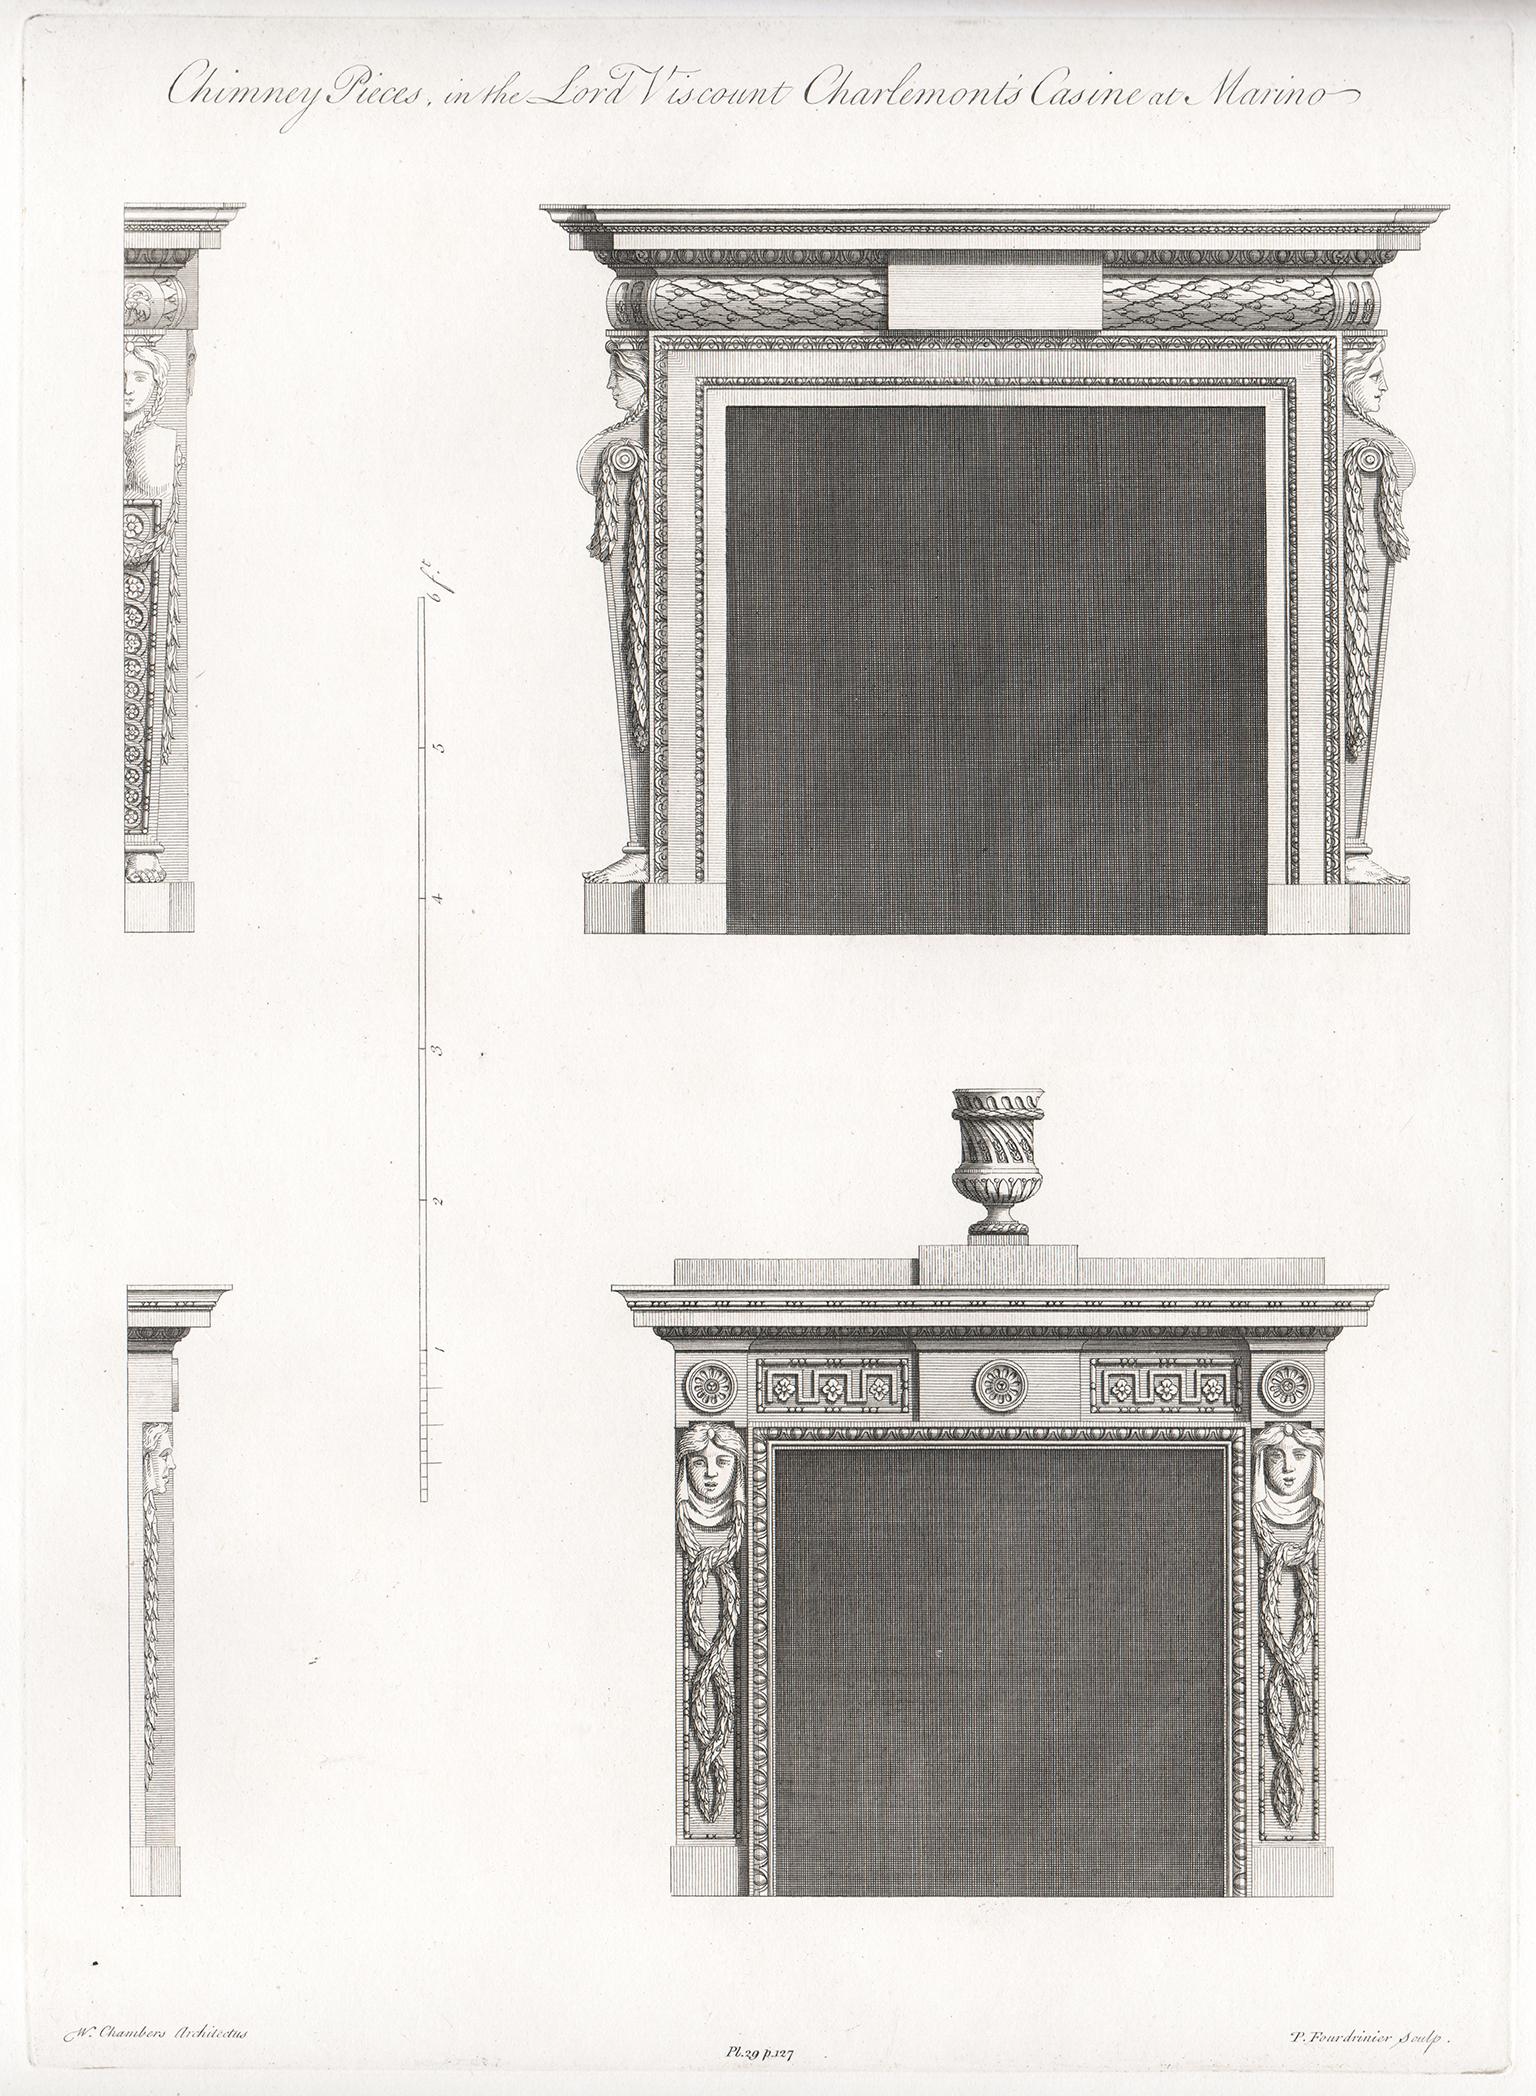 Unknown Landscape Print - William Chambers Georgian Architecture - Chimney Pieces